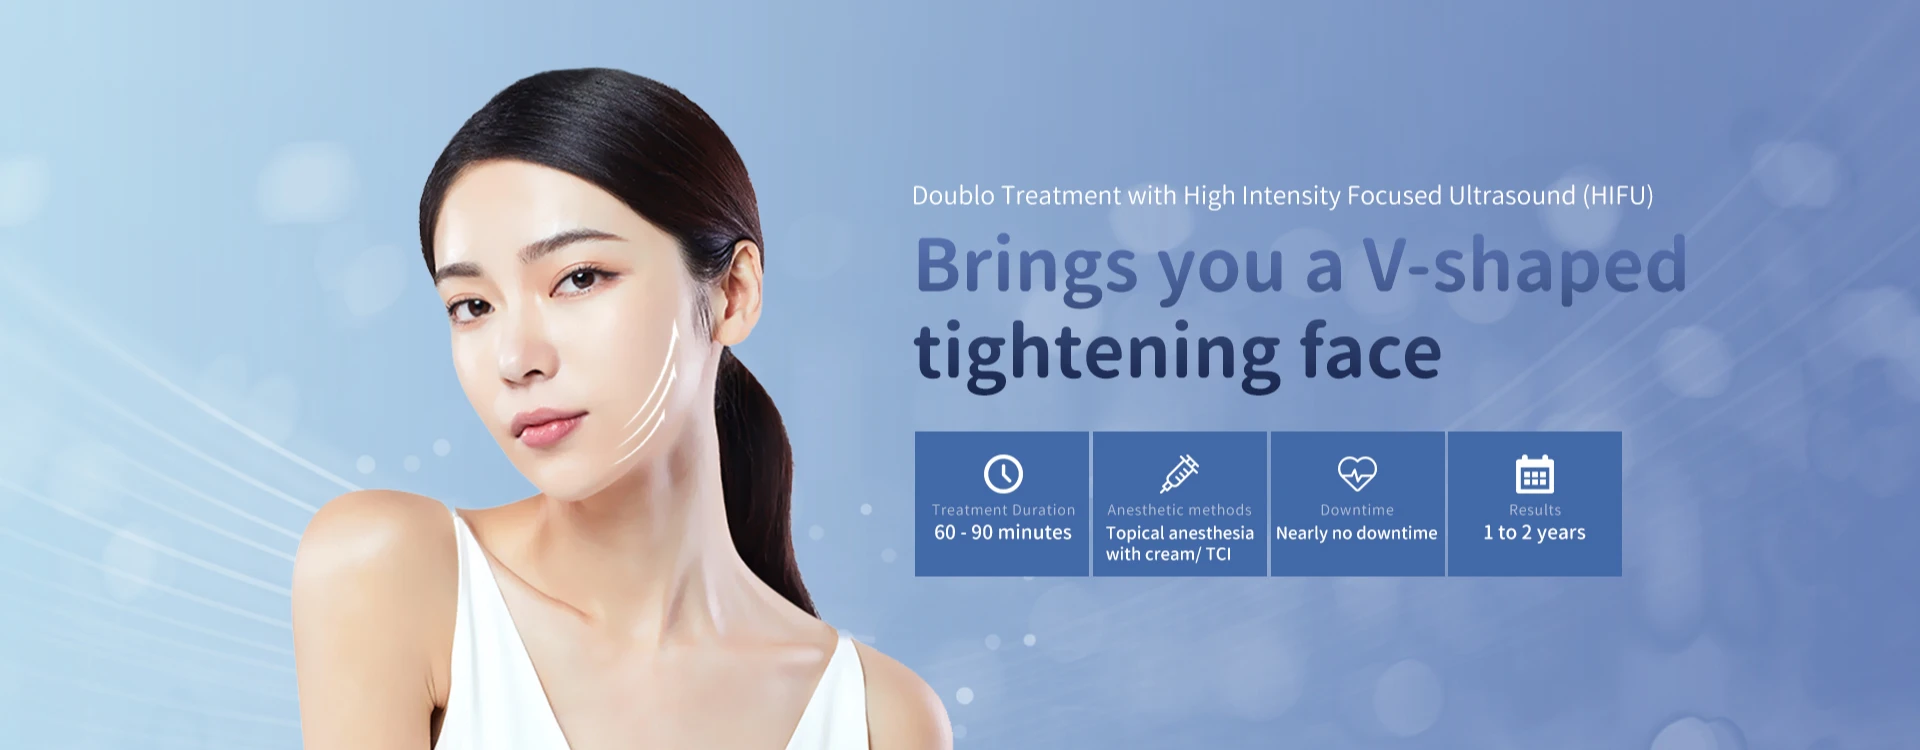 Doublo Treatment with High Intensity Focused Ultrasound (HIFU) | Brings
 you a V-shaped tightening face